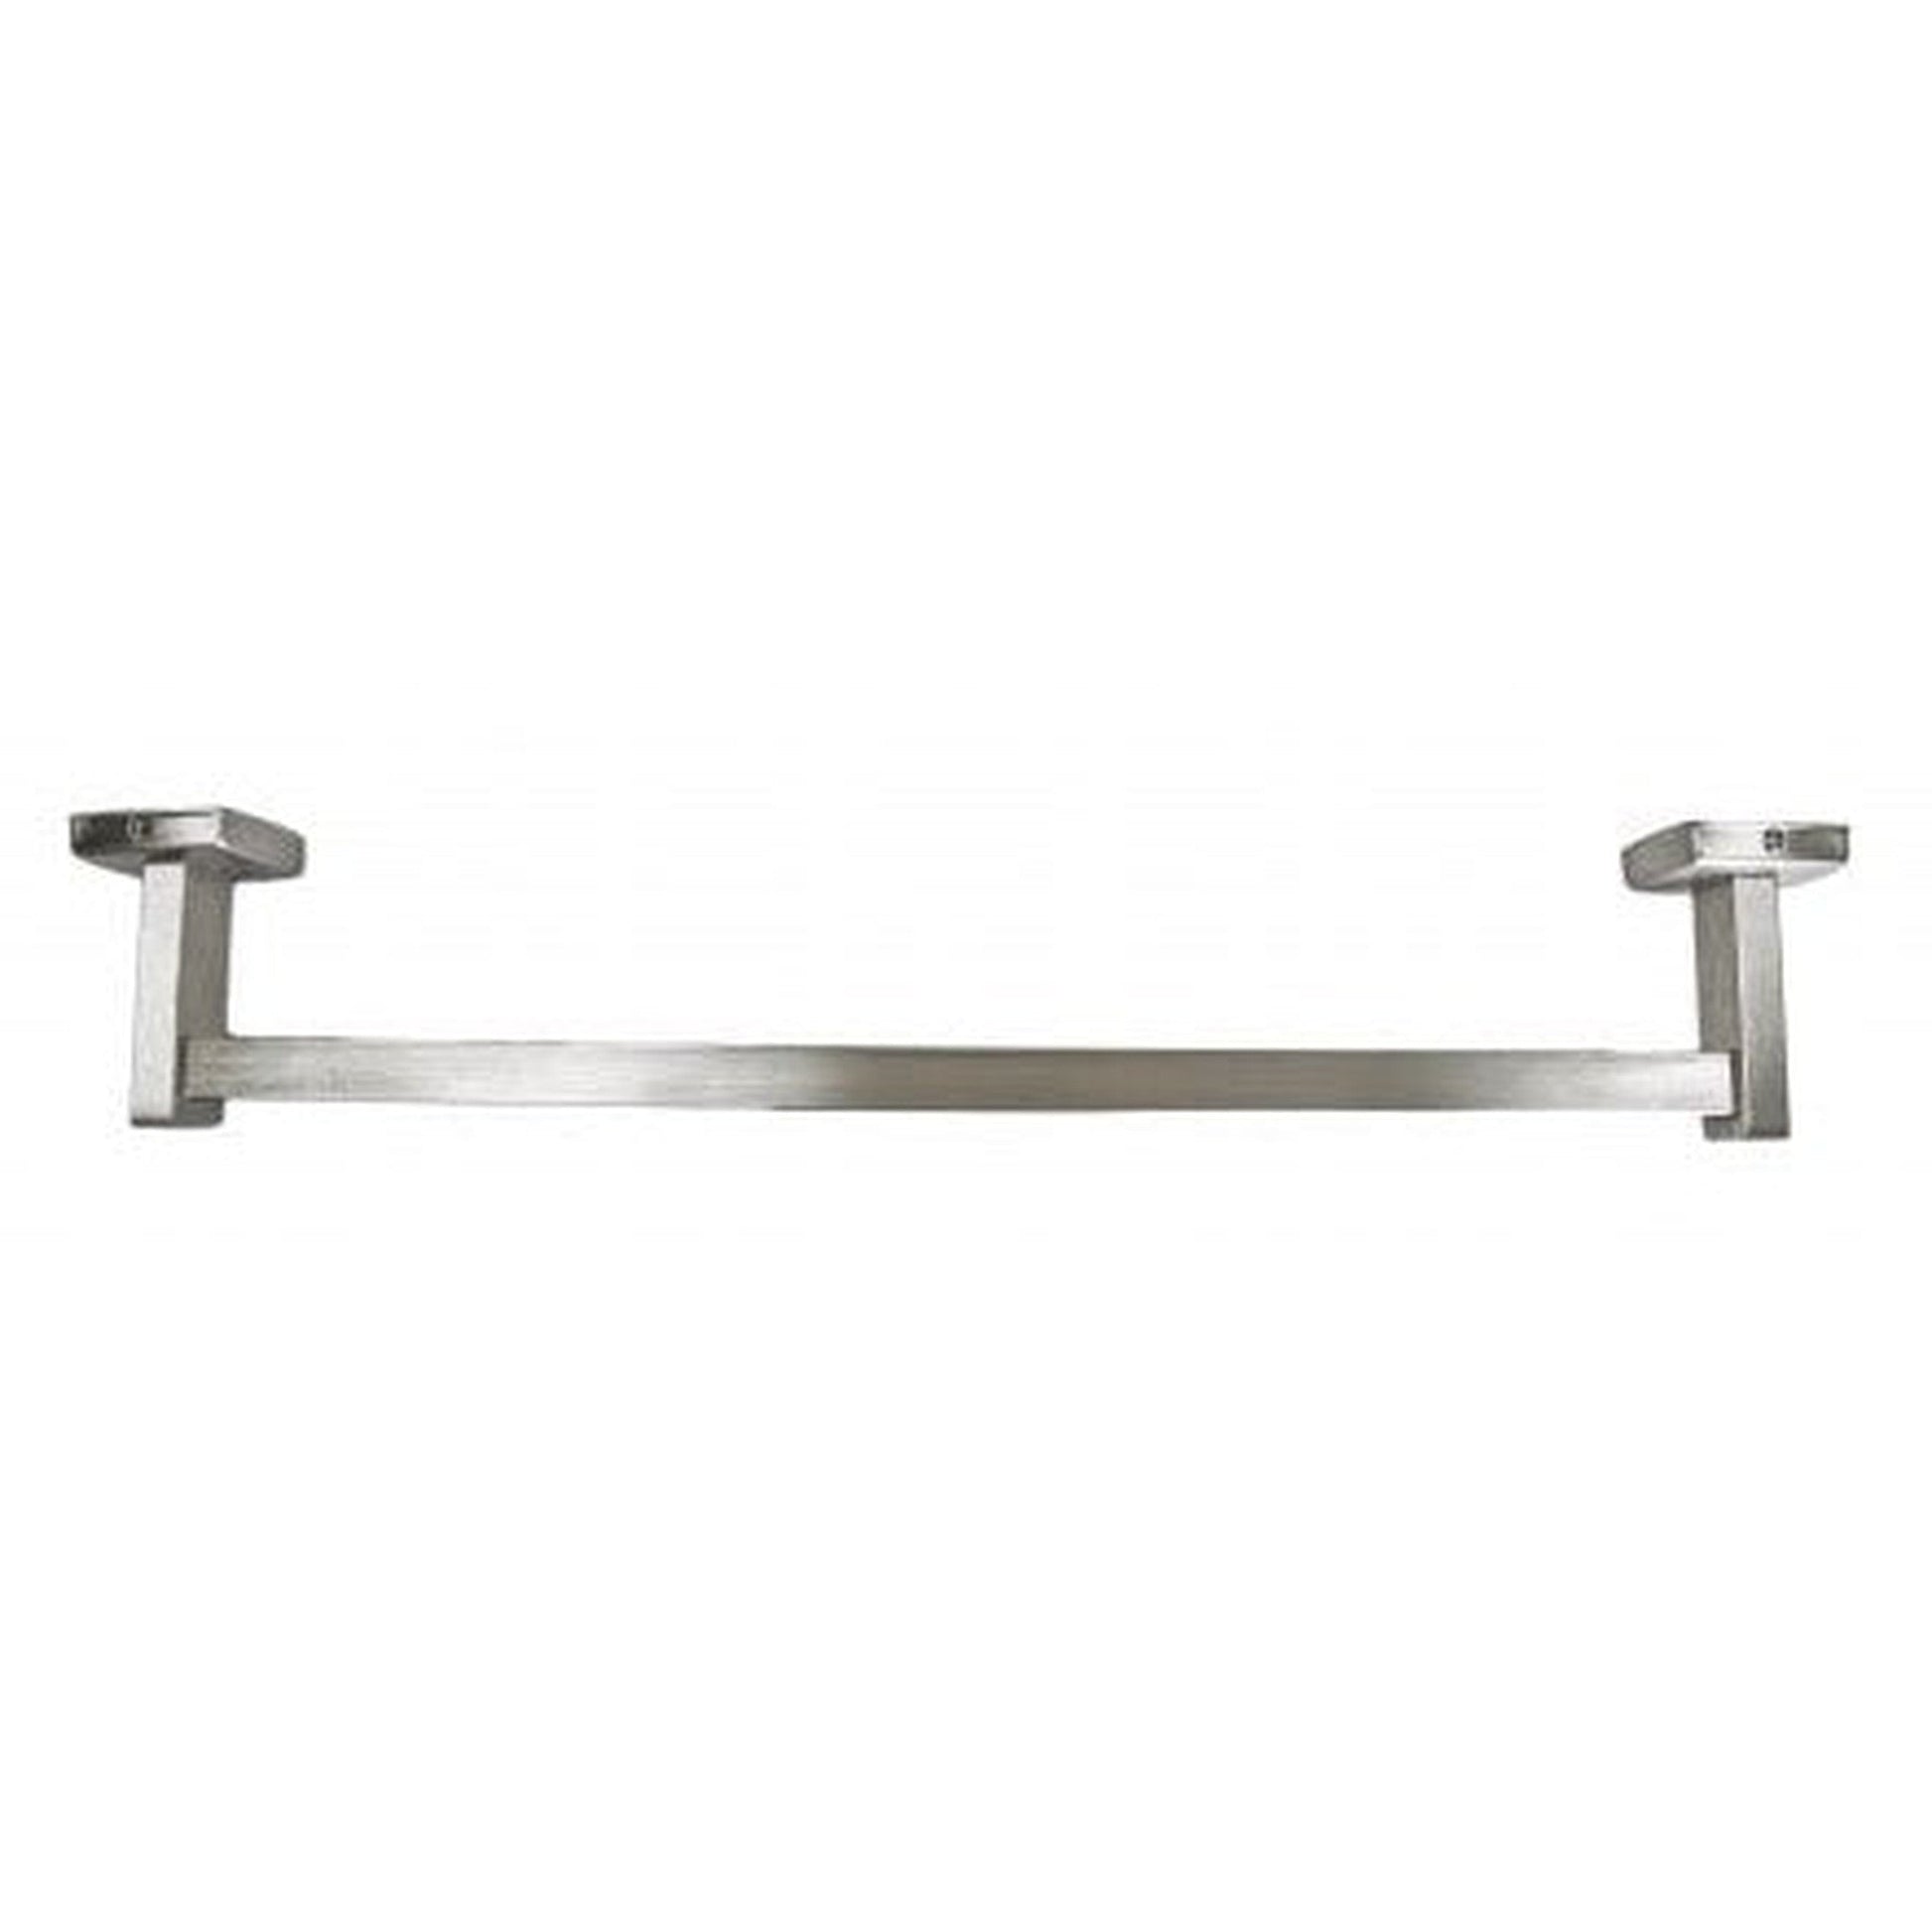 Frost 36 x 3.5 x 3 Brushed Stainless Steel Towel Rack